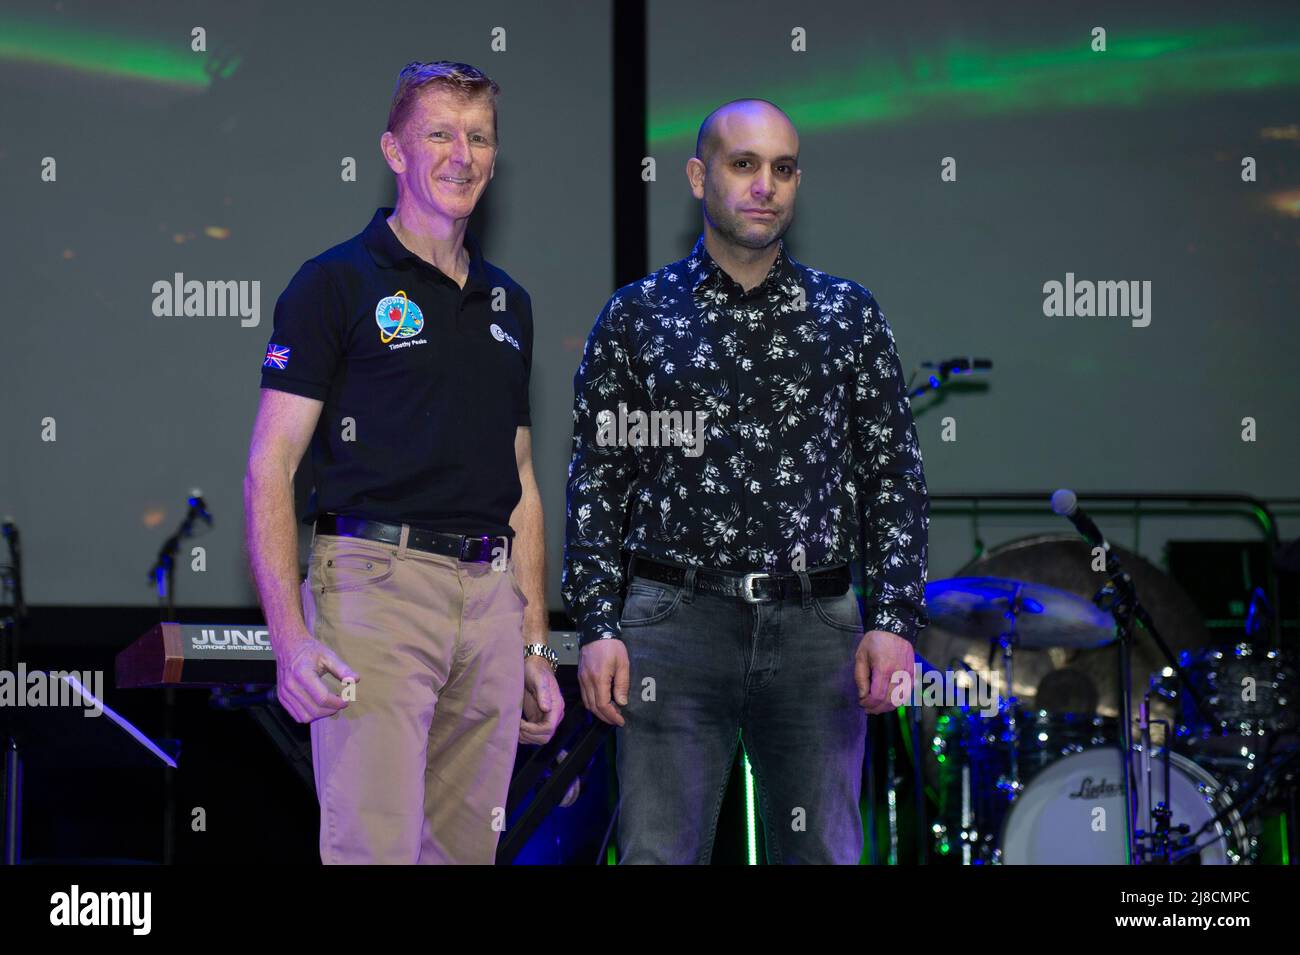 London 15th May 2022: European Space Agency astronaut Sir Major Tim Peake and Composer Ilan Eshkeri onstage at the Royal Albert Hall ahead of a performance of 'Space Station Earth', a concert inspired by astronauts' experiences on the International Space Station. Claire Doherty/Alamy Live News Stock Photo